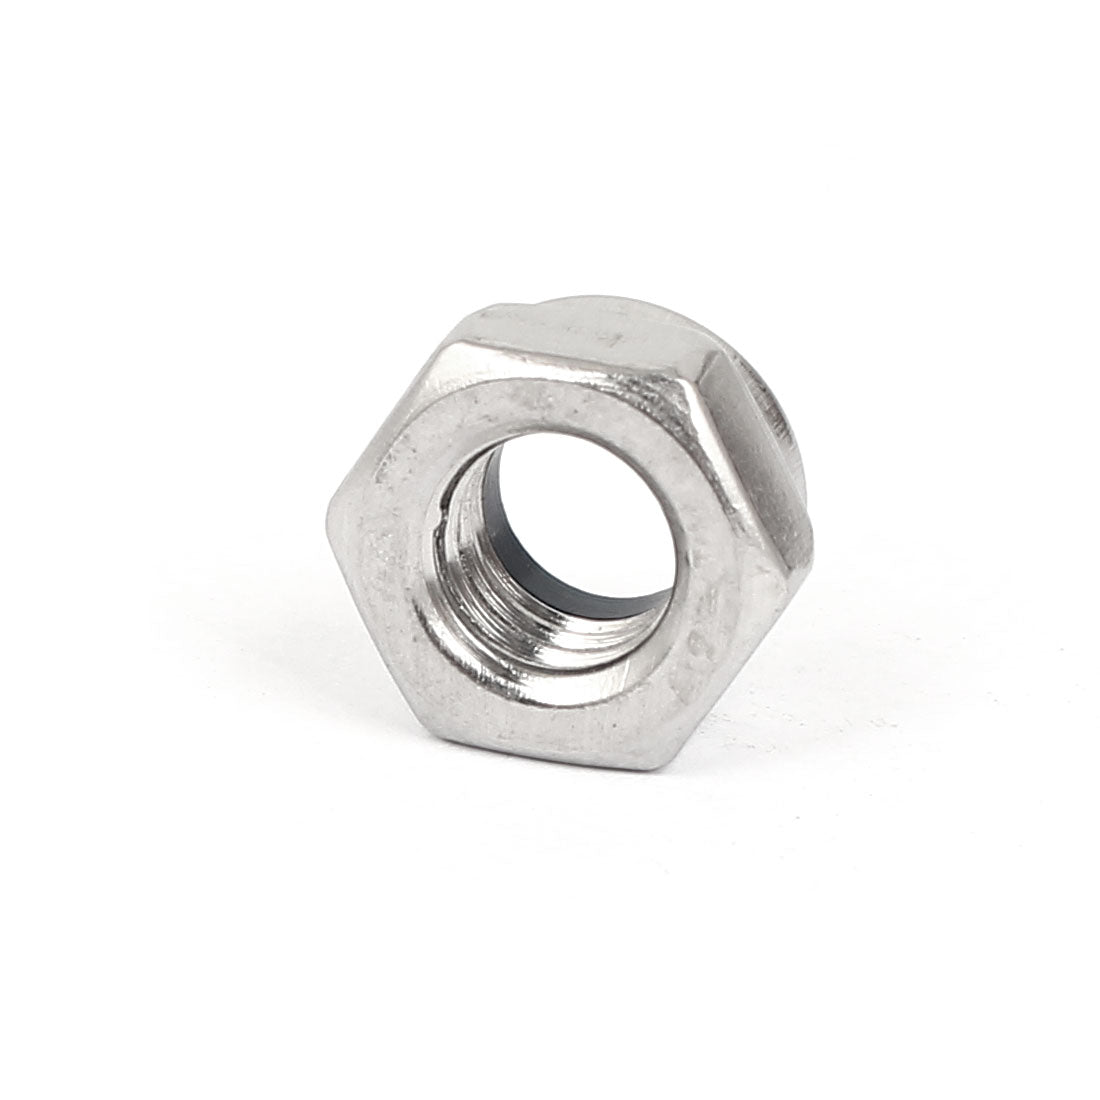 Uxcell Uxcell M8 304 Stainless Steel Nylock Self-Locking Nylon Insert Hex Lock Nuts 20pcs